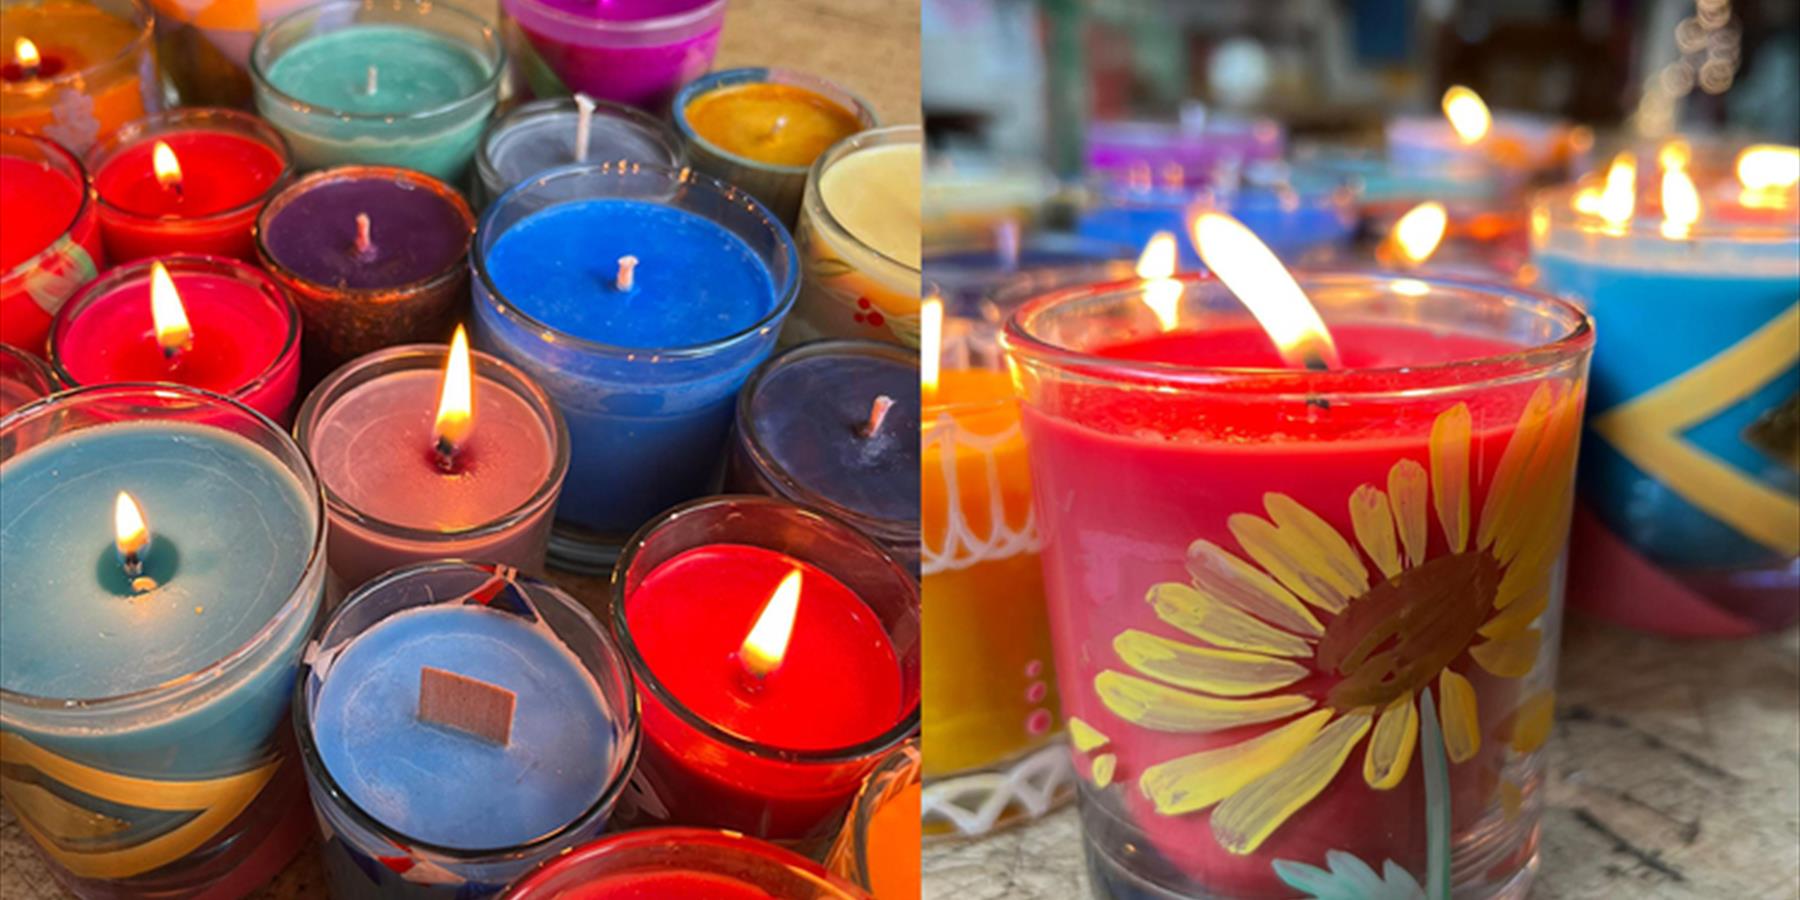 Candle Making and Glass Painting